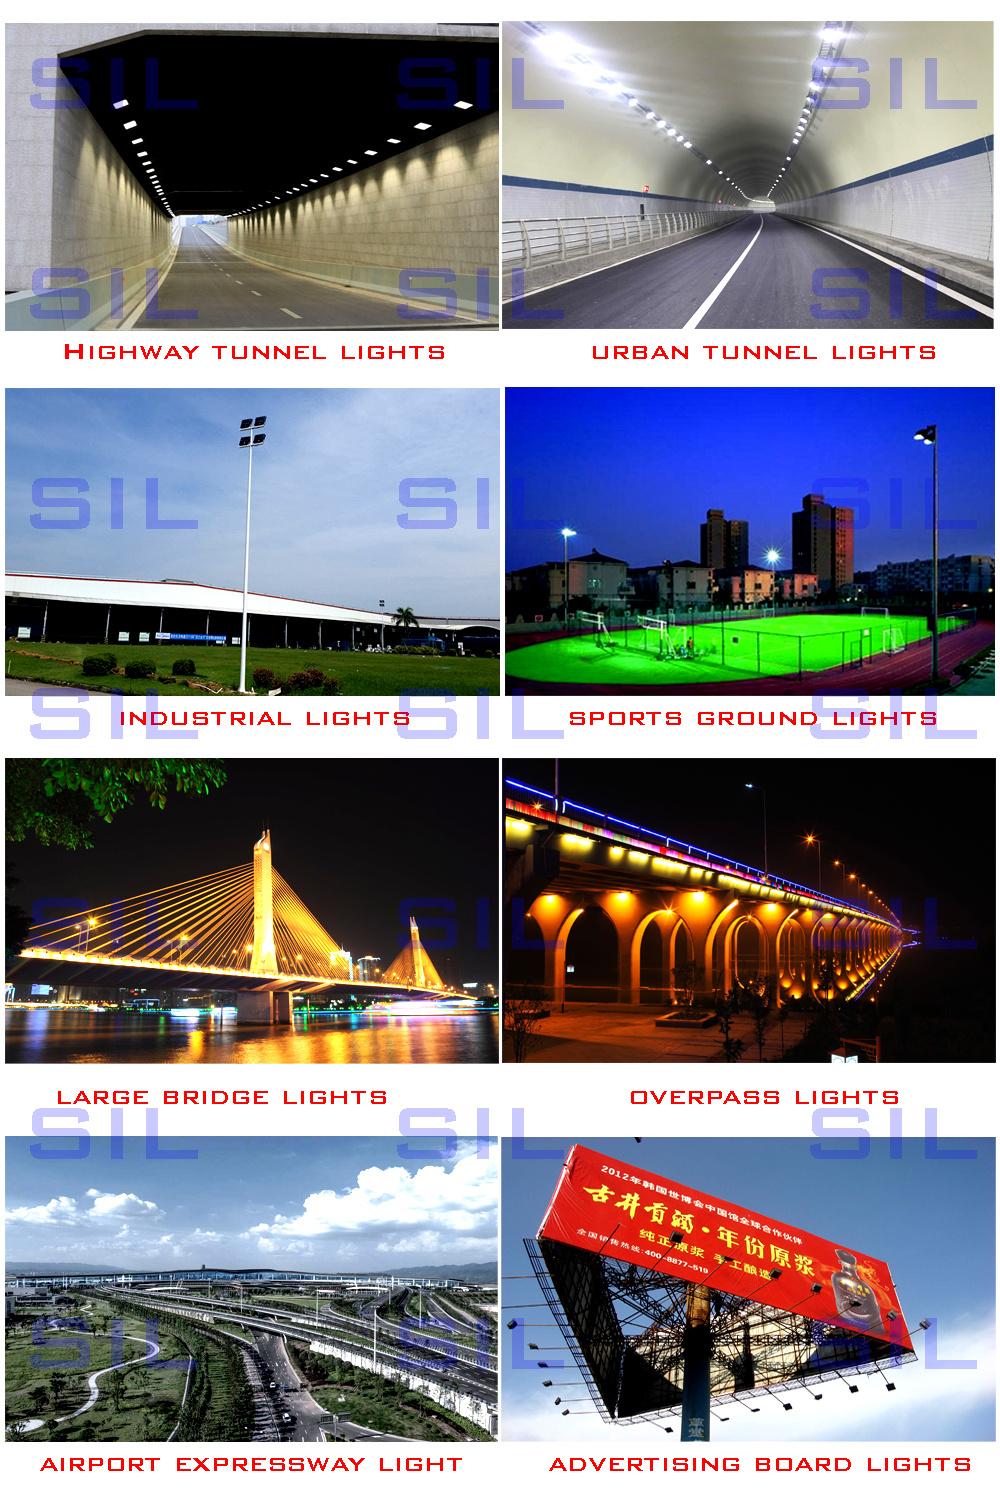 High Bright Square Projector Lamp IP66 Waterproof Ultra Slim SMD Reflectores Light AC100V to 265V 10W Outdoor LED Flood Light